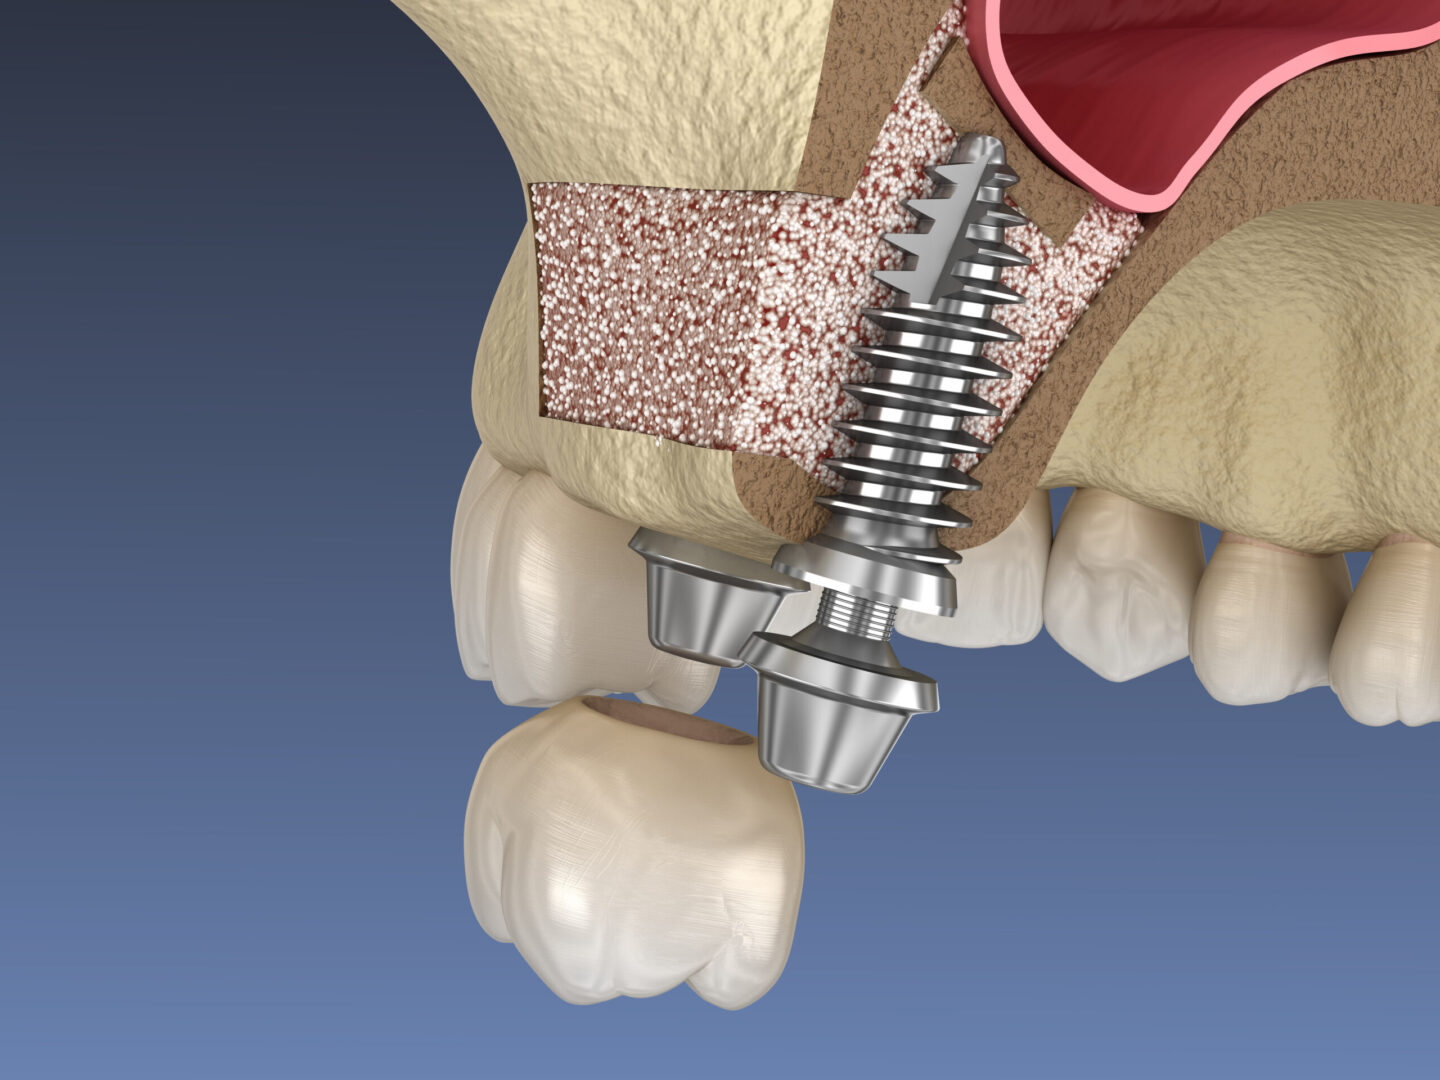 Sinus Lift Surgery and implant installation with Aspire Surgical in Salt Lake City, UT